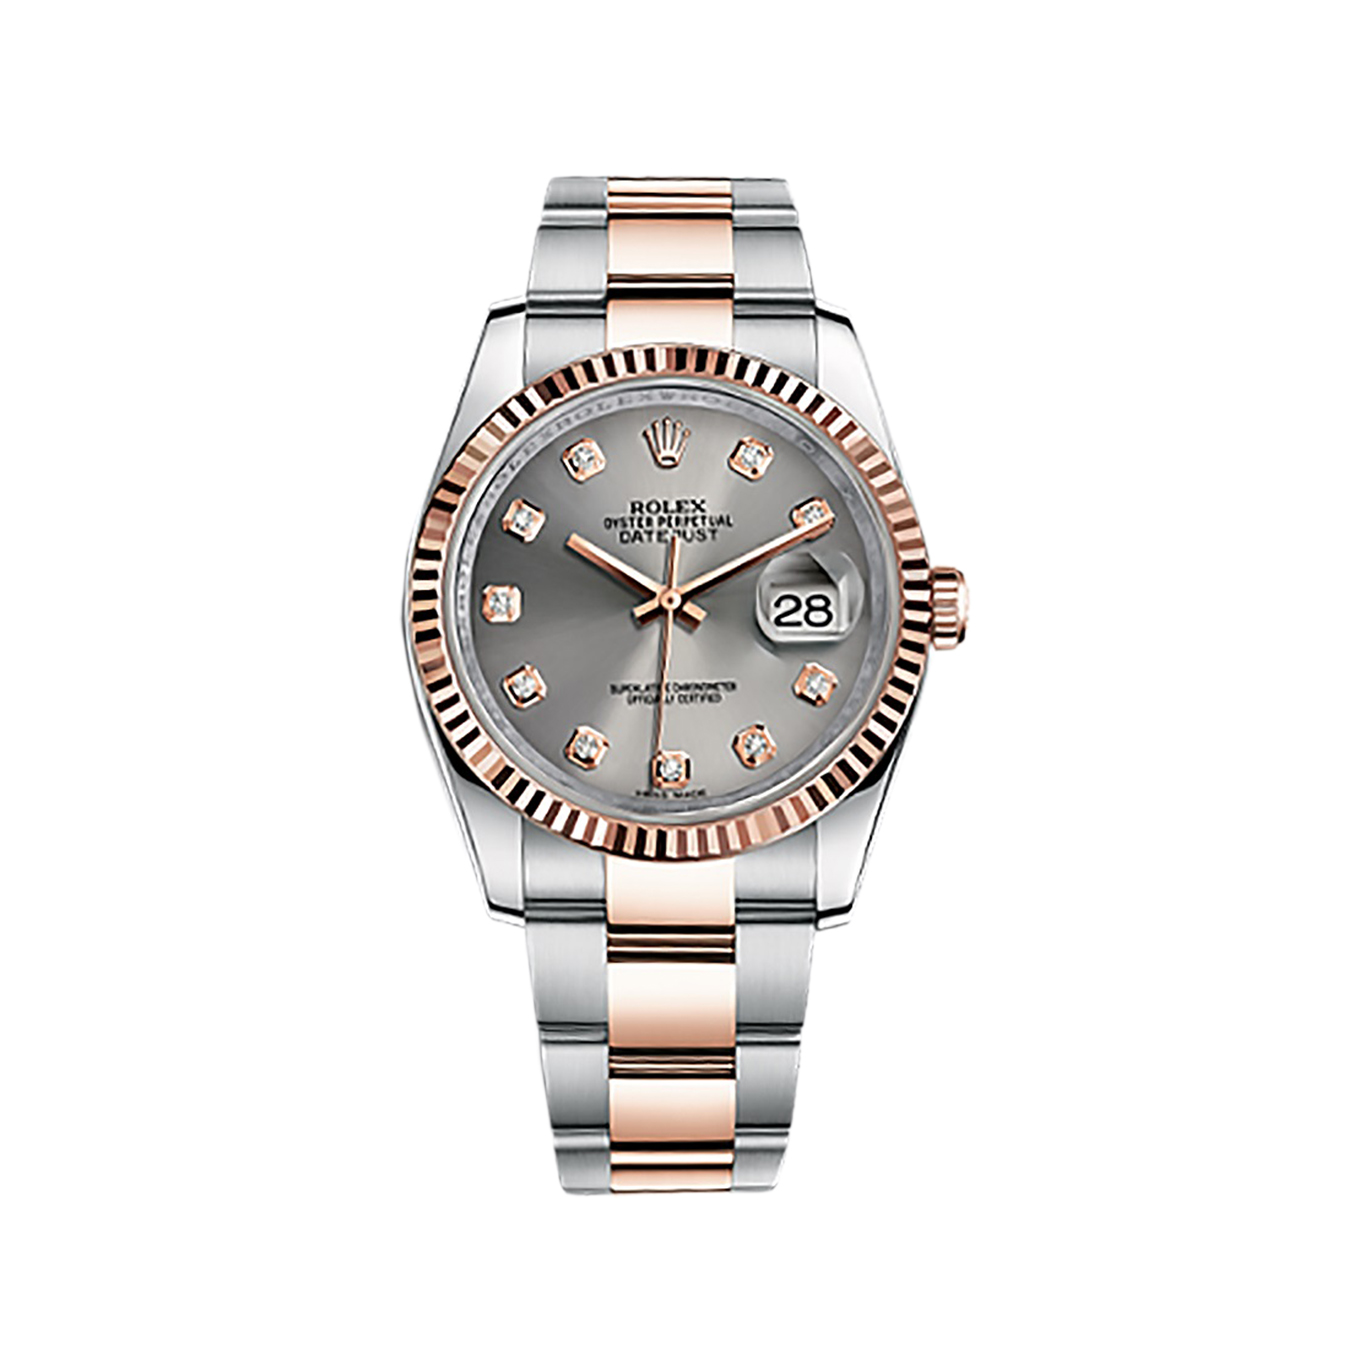 Datejust 36 116231 Rose Gold & Stainless Steel Watch (Steel Set with Diamonds)